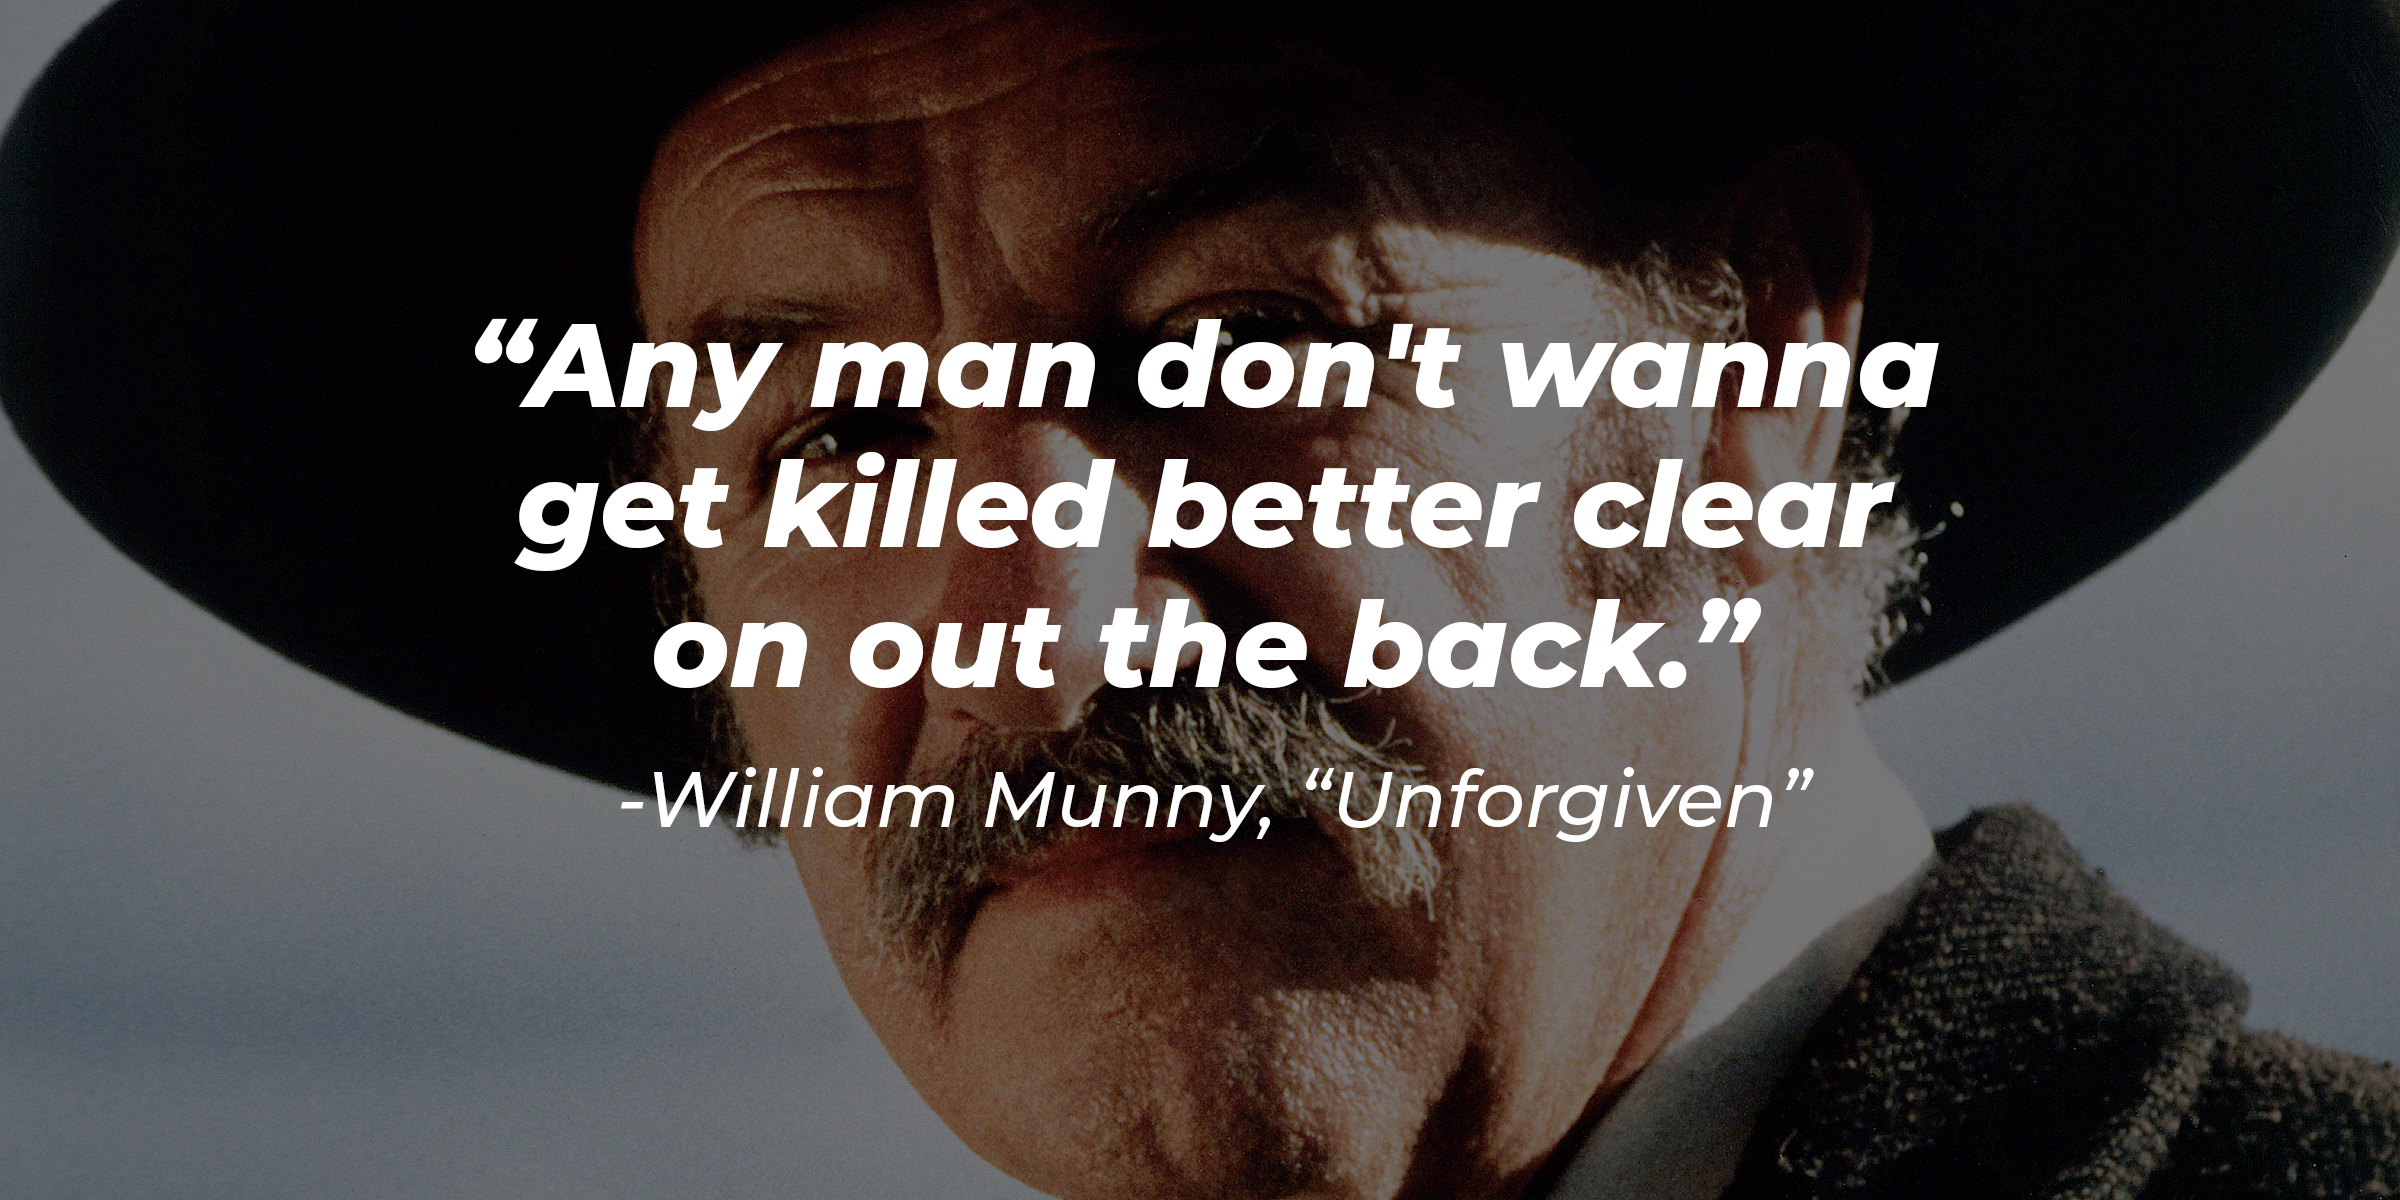 William Munny with his quote: "Any man don't wanna get killed better clear on out the back." | Source: Getty Images